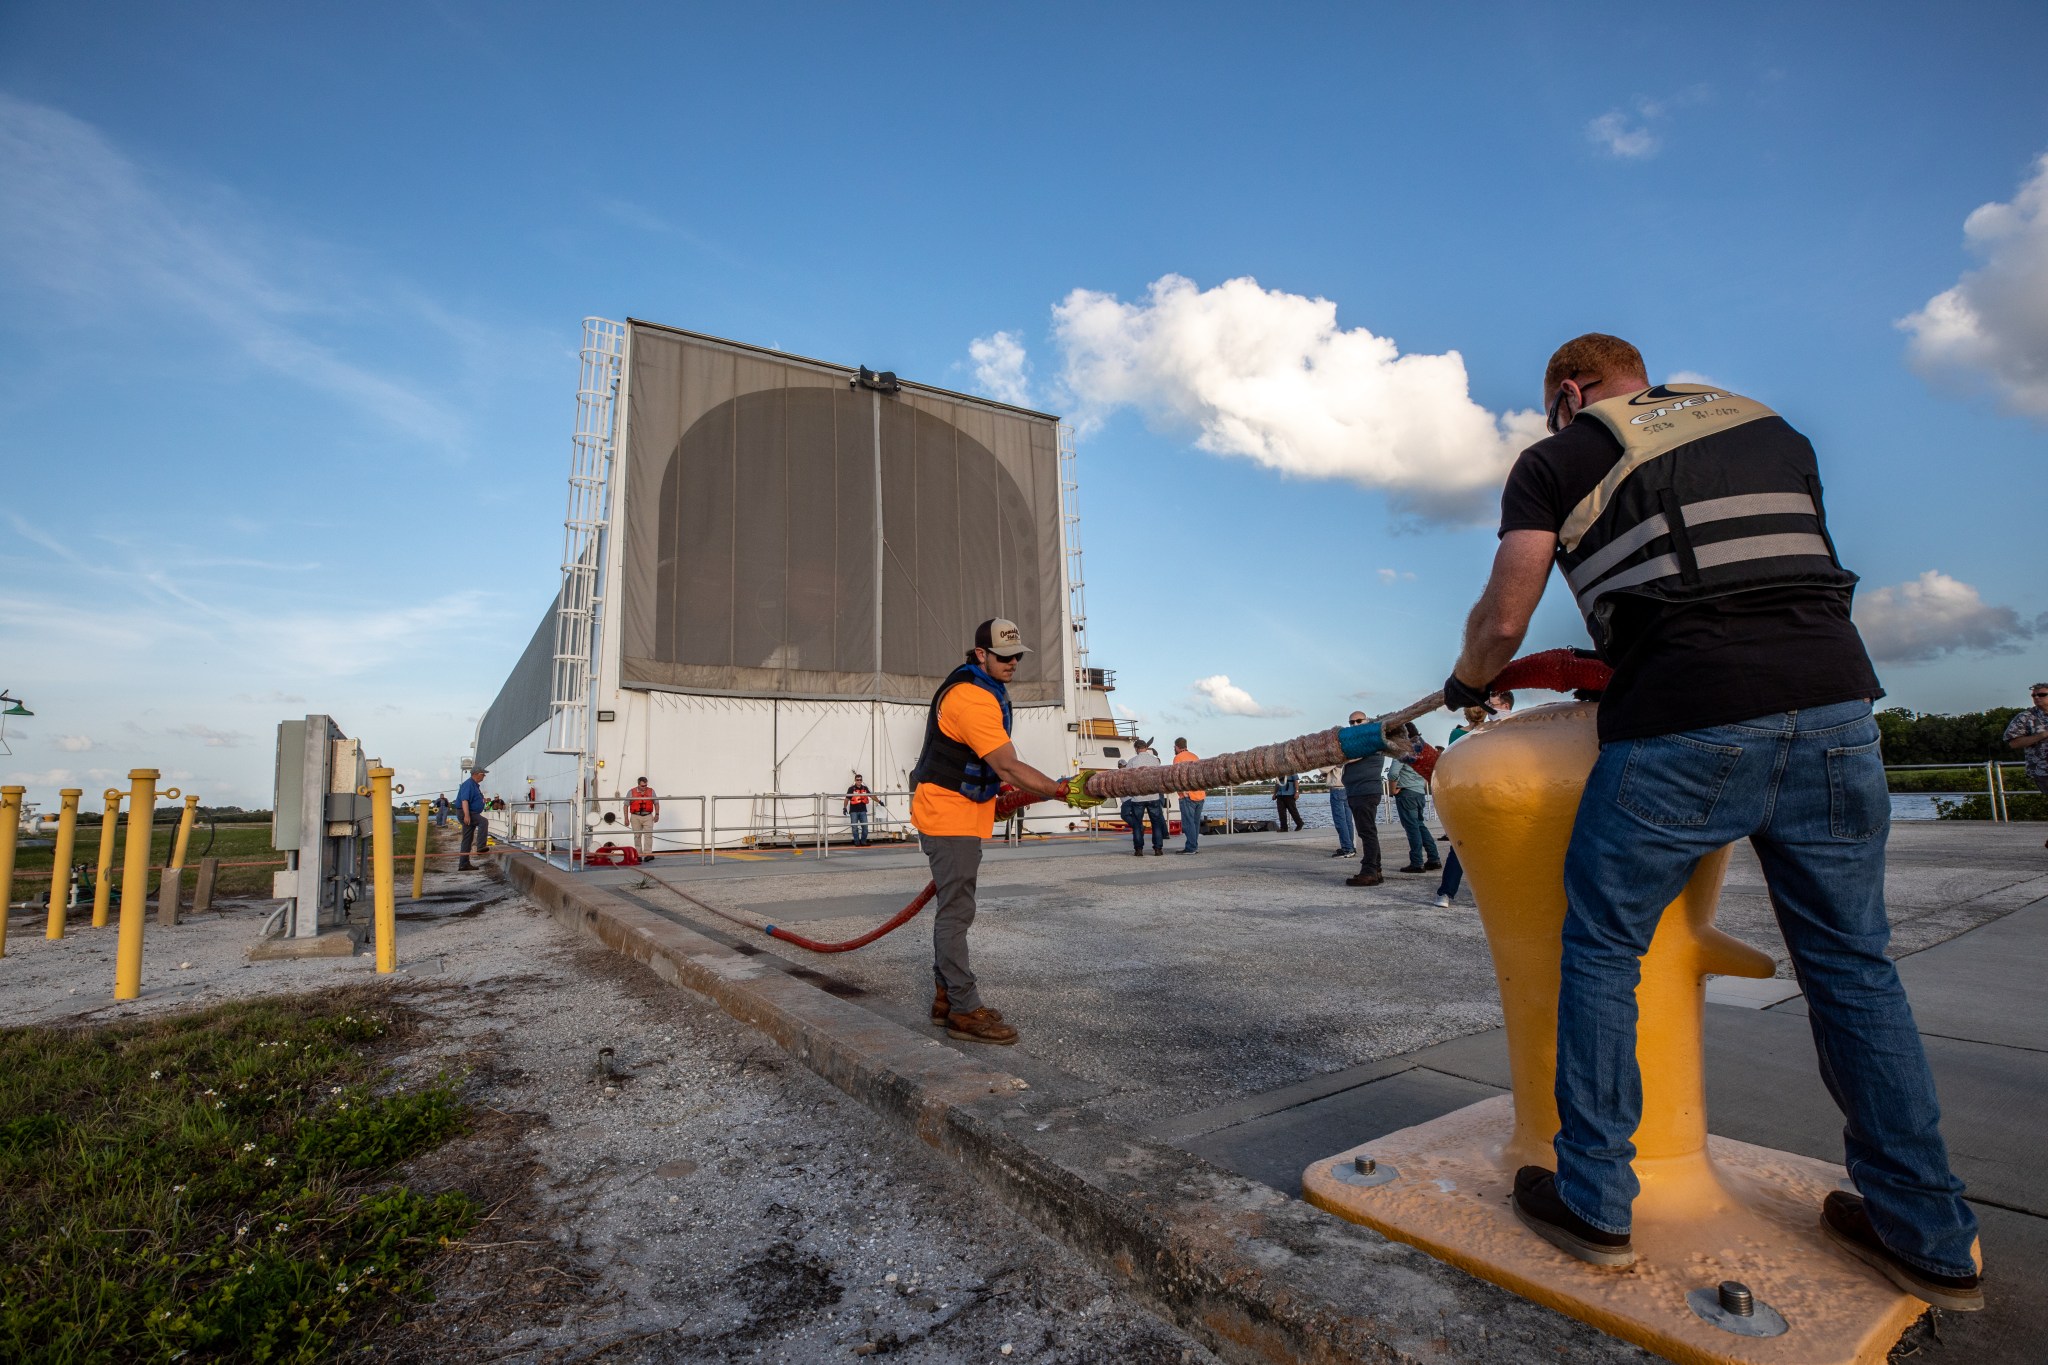 The Space Launch System core stage for Artemis I arrives at Kennedy Space Center in Florida on April 27, 2021.